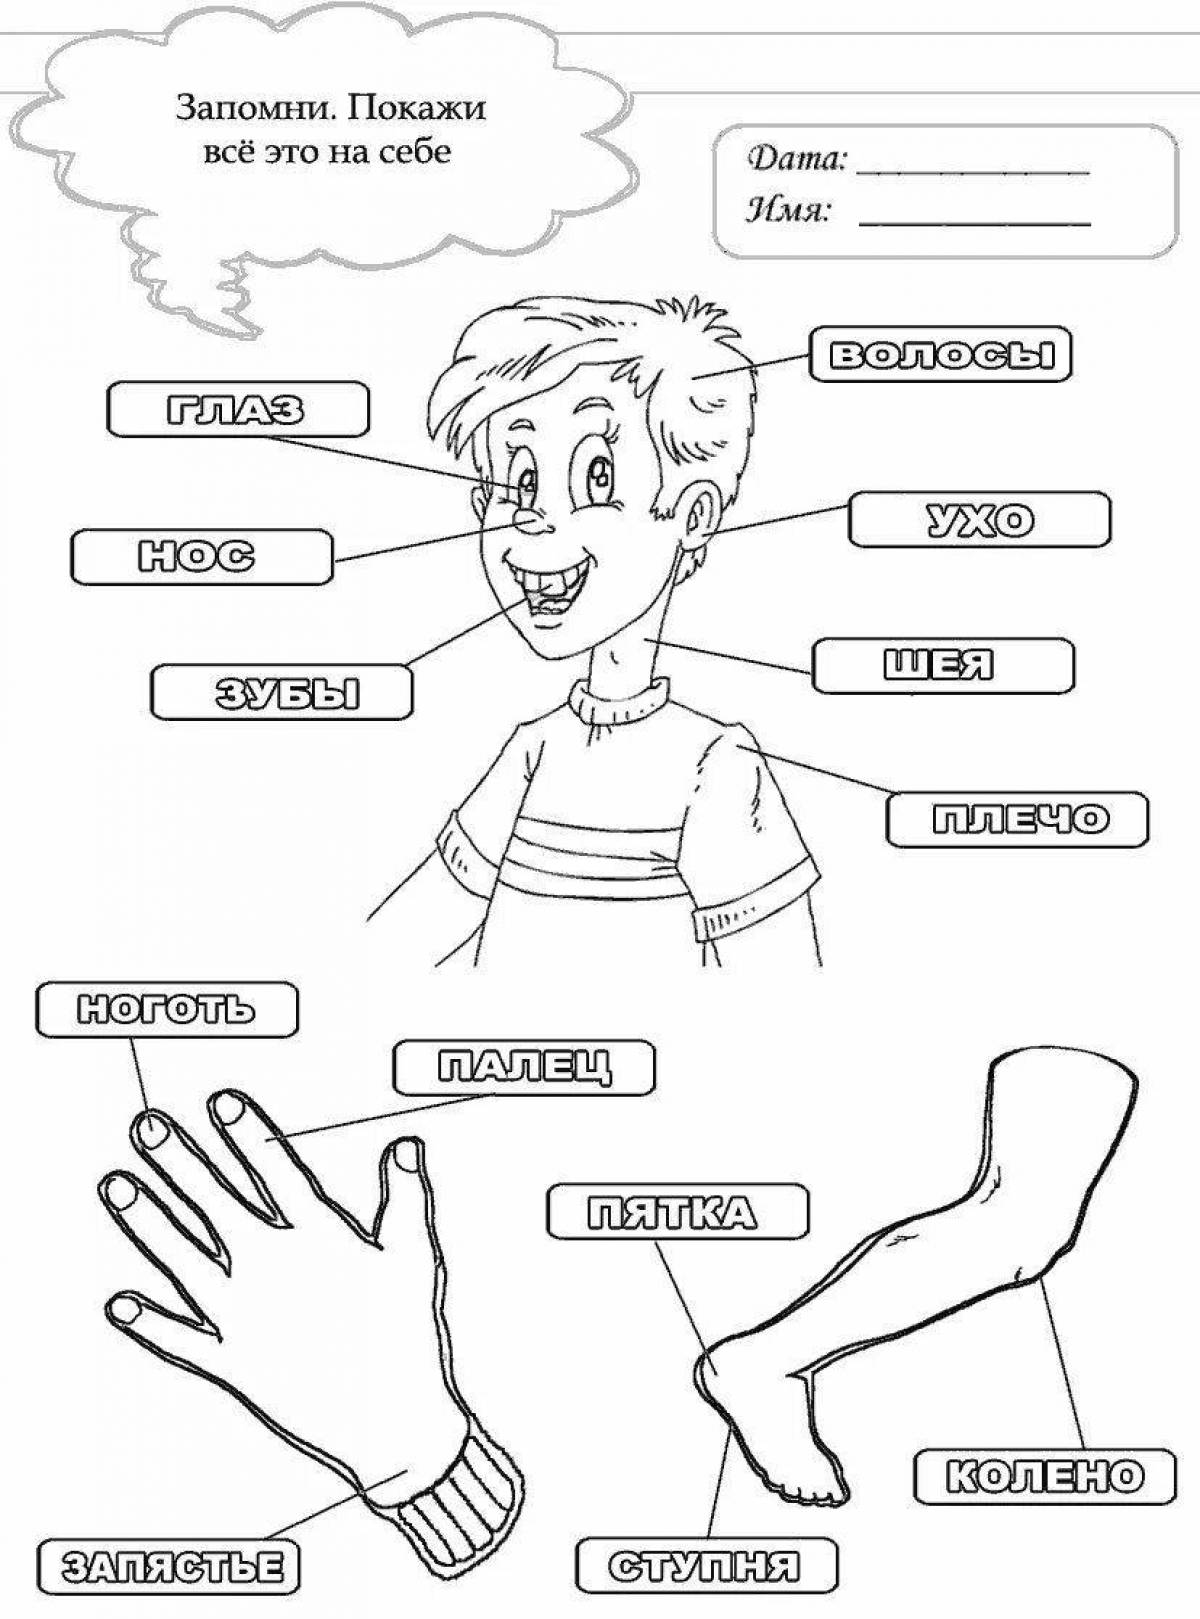 Creative human body part coloring for kids